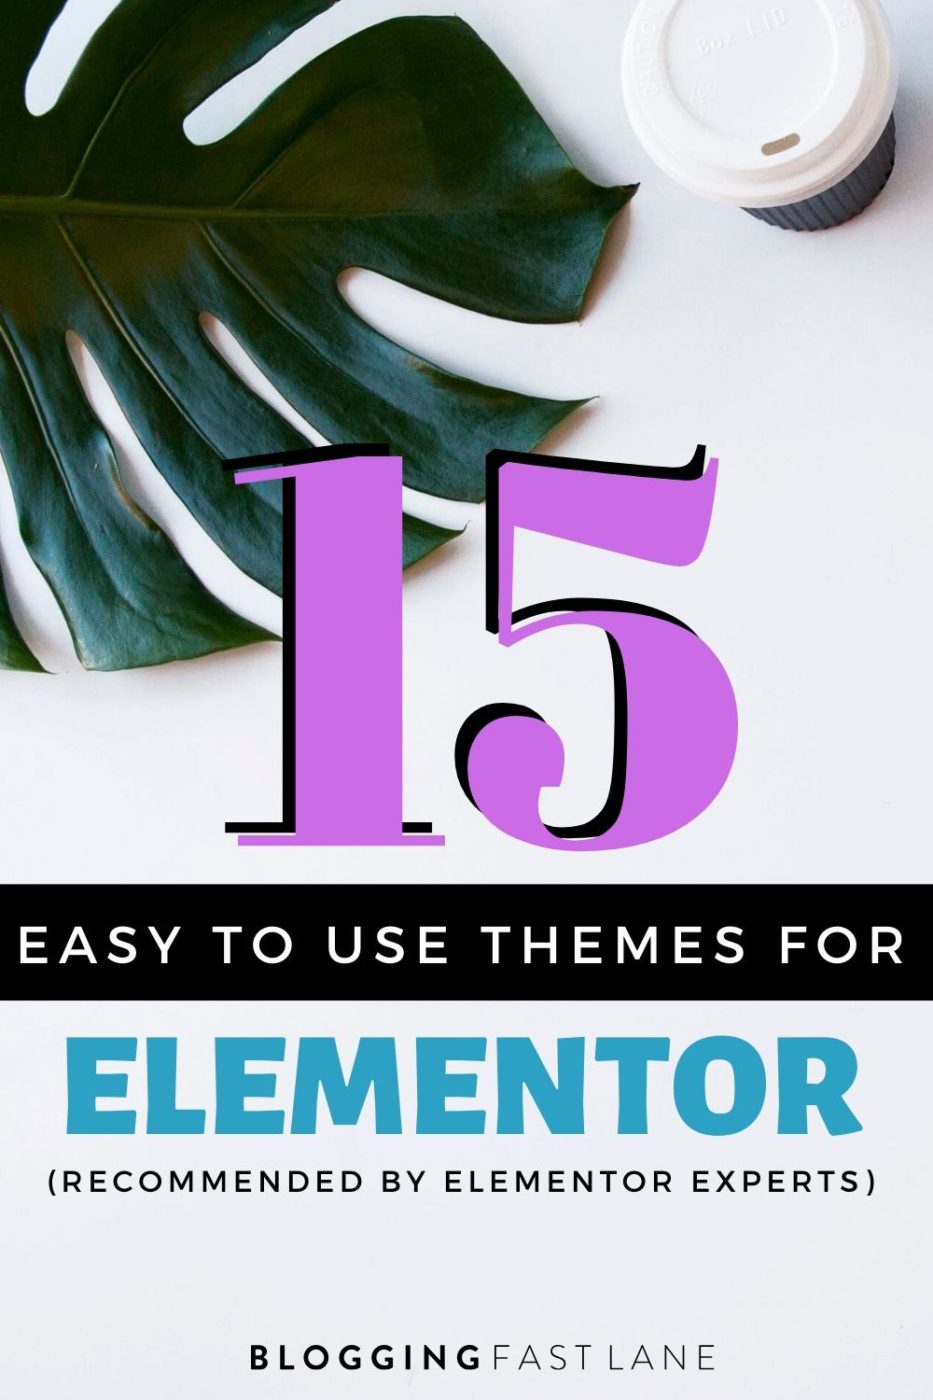 Best Elementor Themes | Designing your website using Elementor? Here are the best Elementor themes to build your blog with ease!